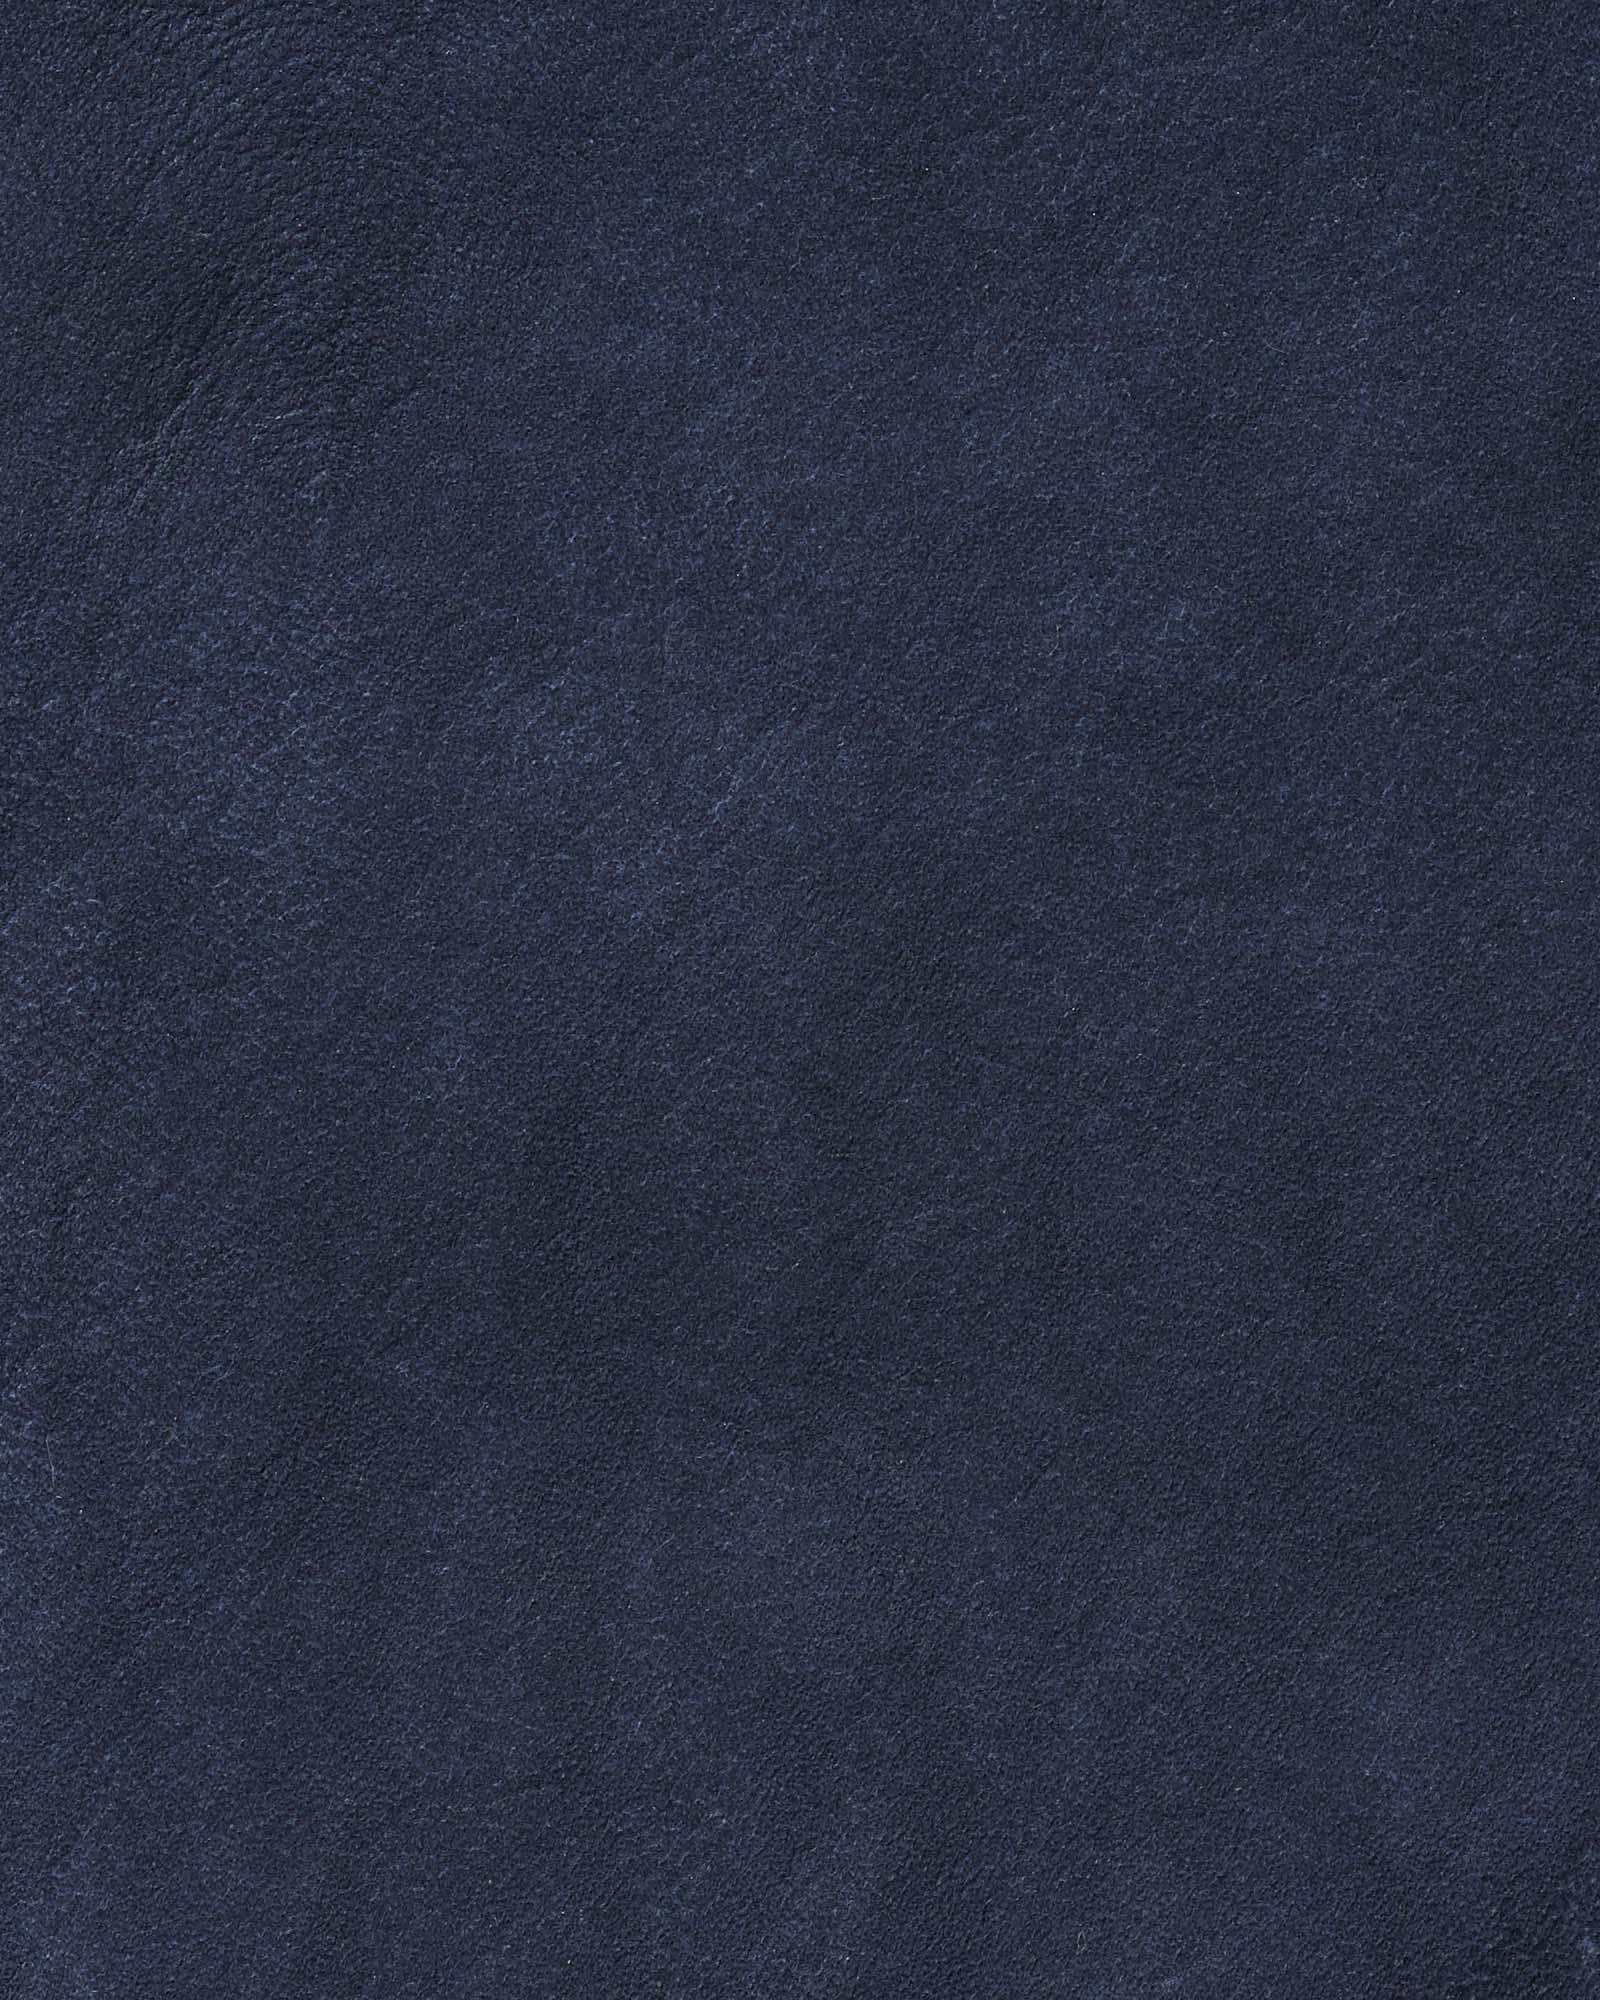 Collonil Colorit Scuff Cream for Smooth Leather-Blue Navy